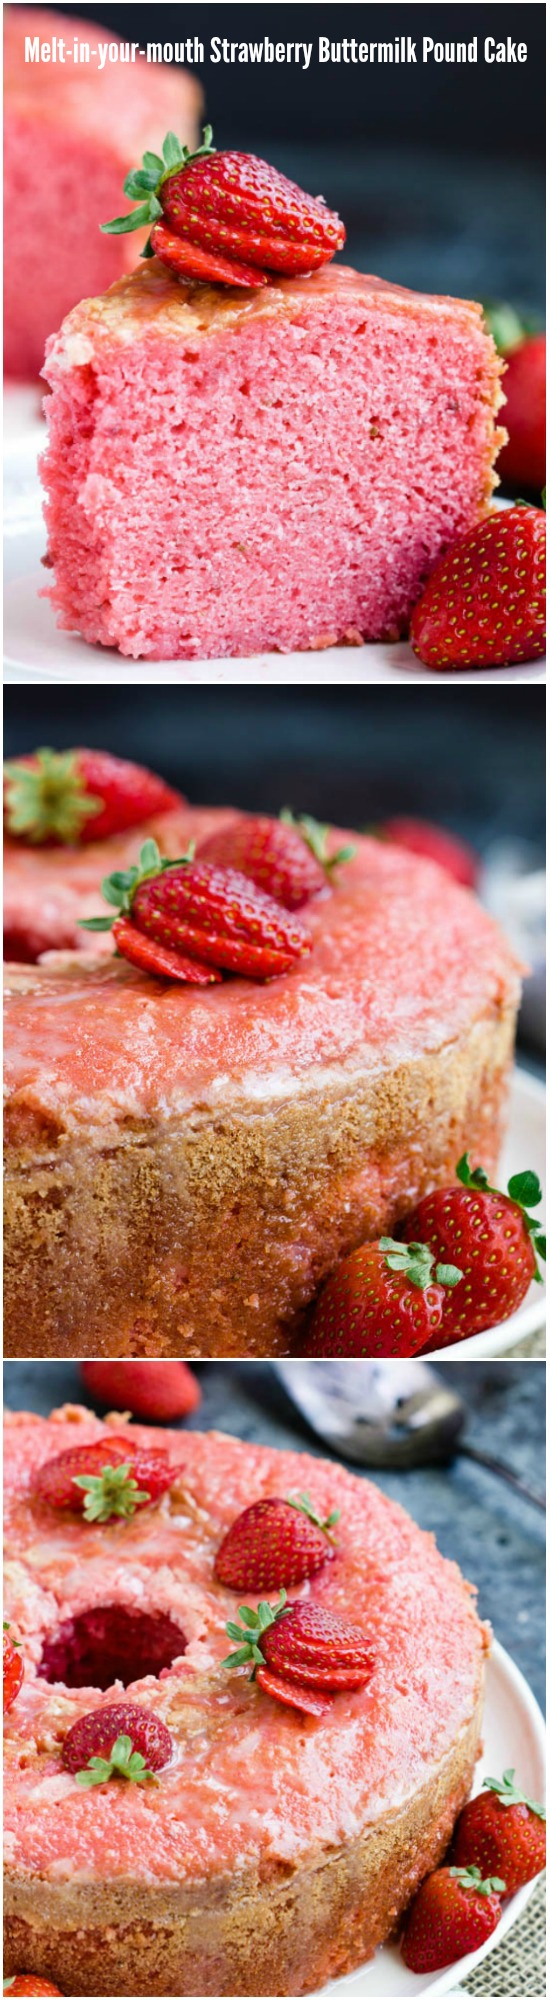 Melt in your Mouth Strawberry Buttermilk Pound Cake is simply amazing. The intense strawberry flavor and ultra-moist cake make a winning combination. #cake #poundcake #poundcakepaula #strawberry #jello #homemade #easy #dessert #recipe #Eastercake #Springcake